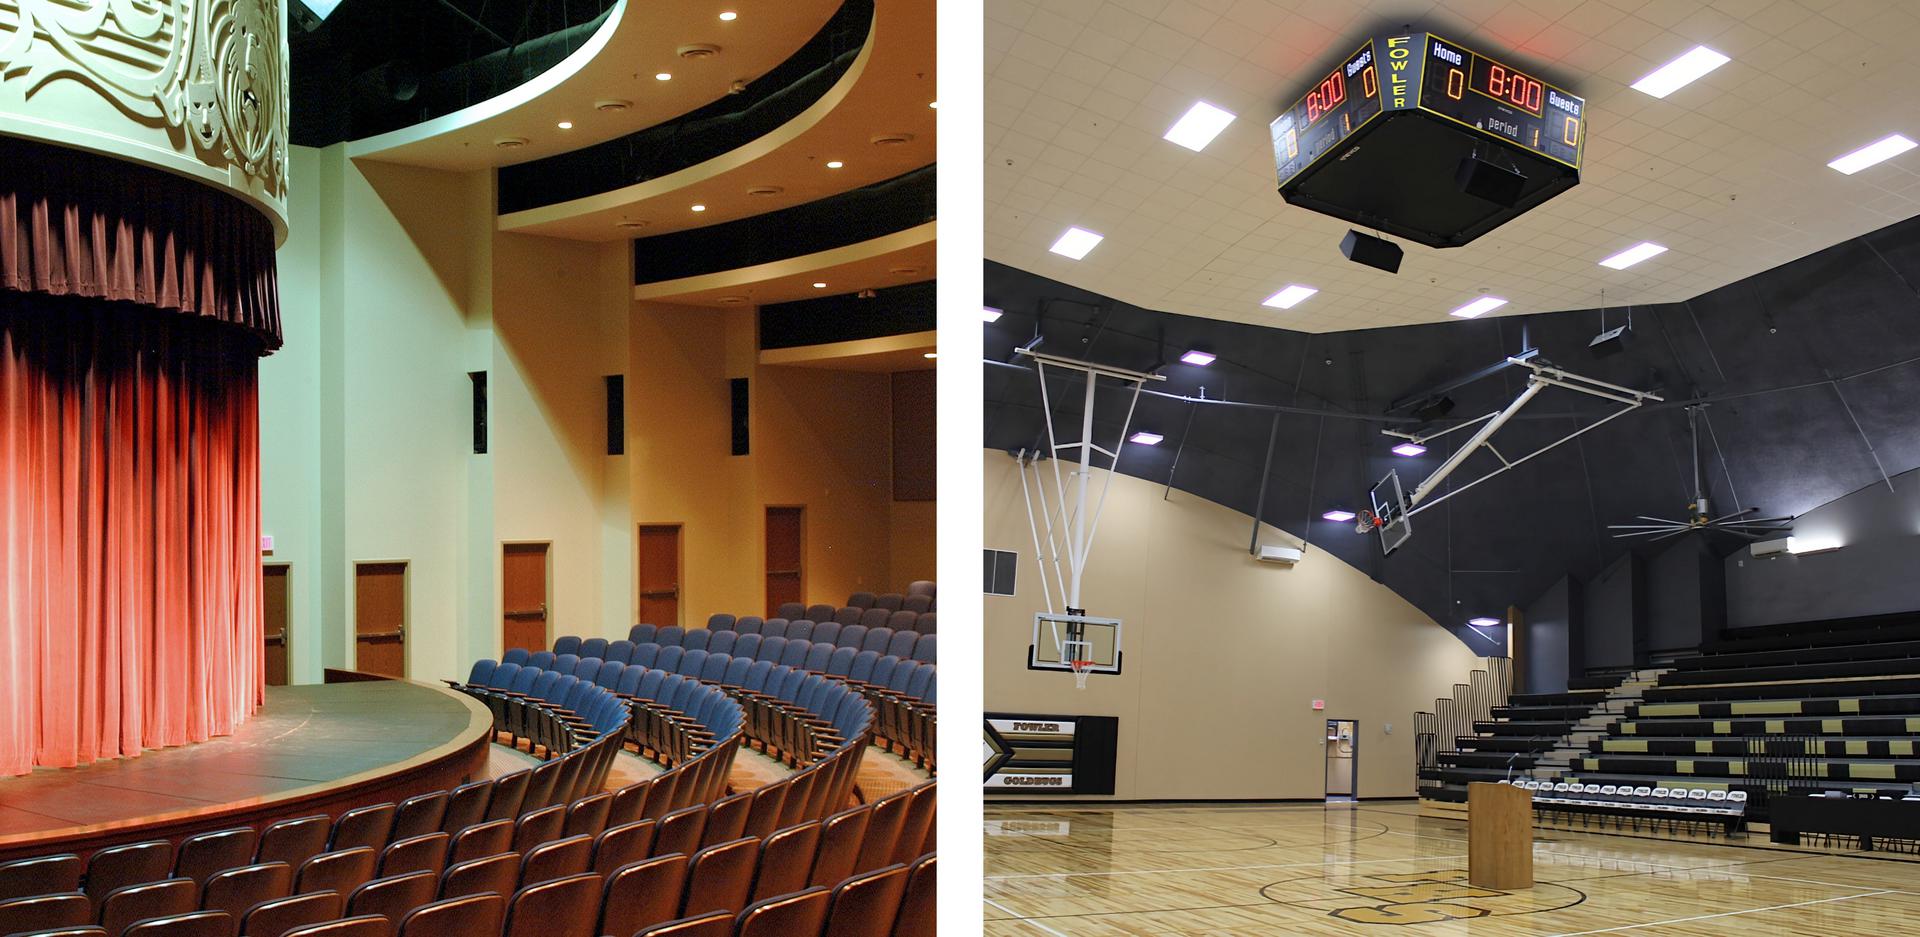 Figure 9: Theater in Gainsville, Texas, USA (left) and Gymnasium in Fowler, Kansas, USA (right).